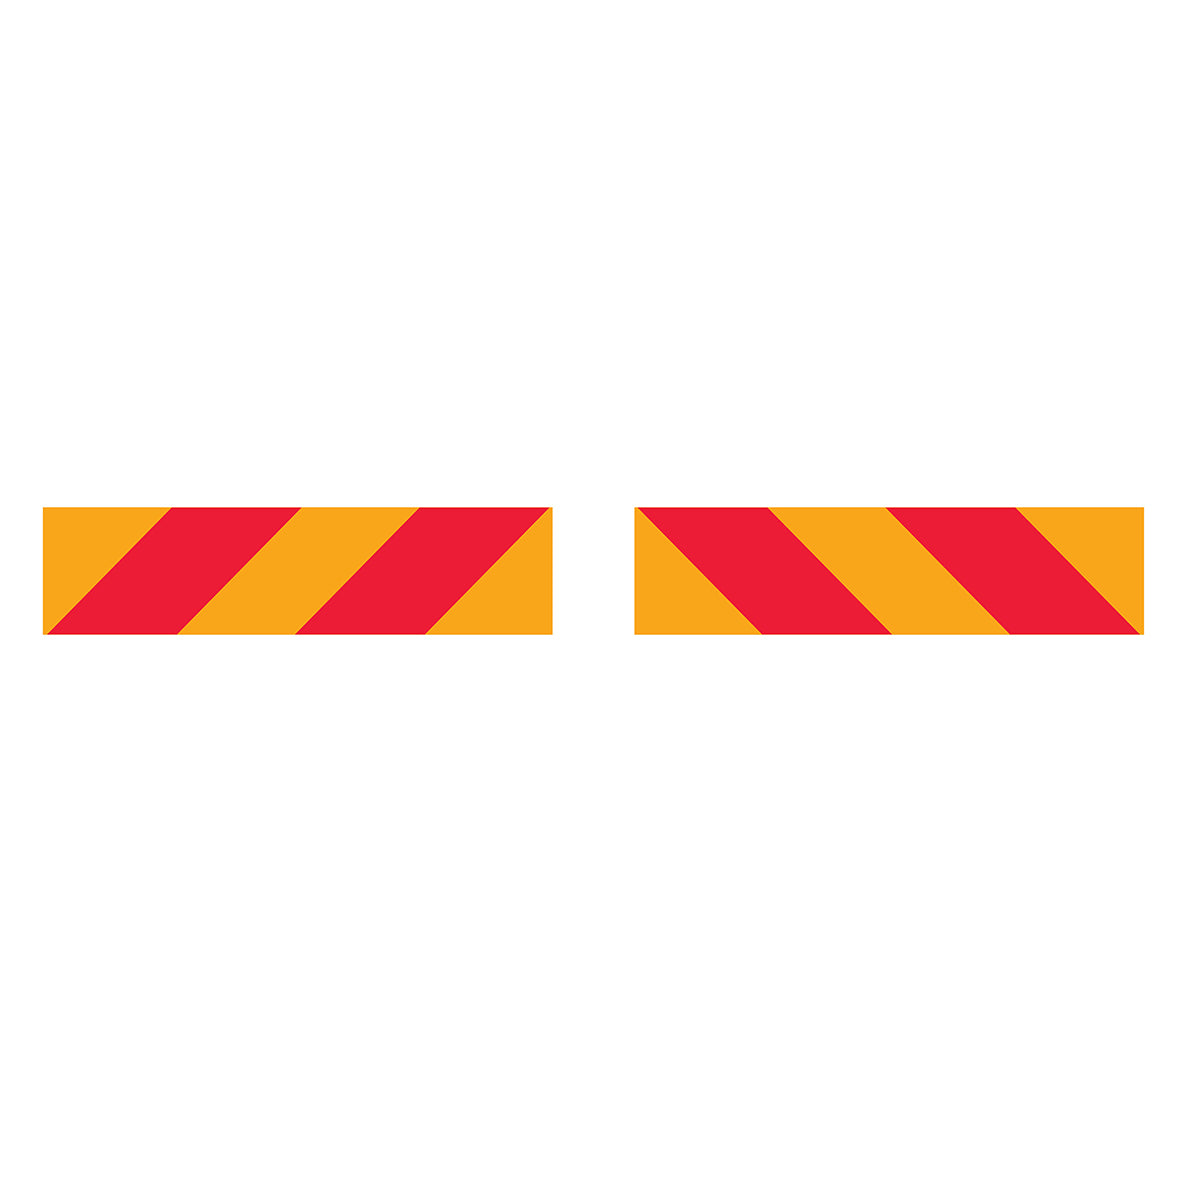 Vehicle Rear Marker Red Yellow Candy Plates (Set) Reflective Sign